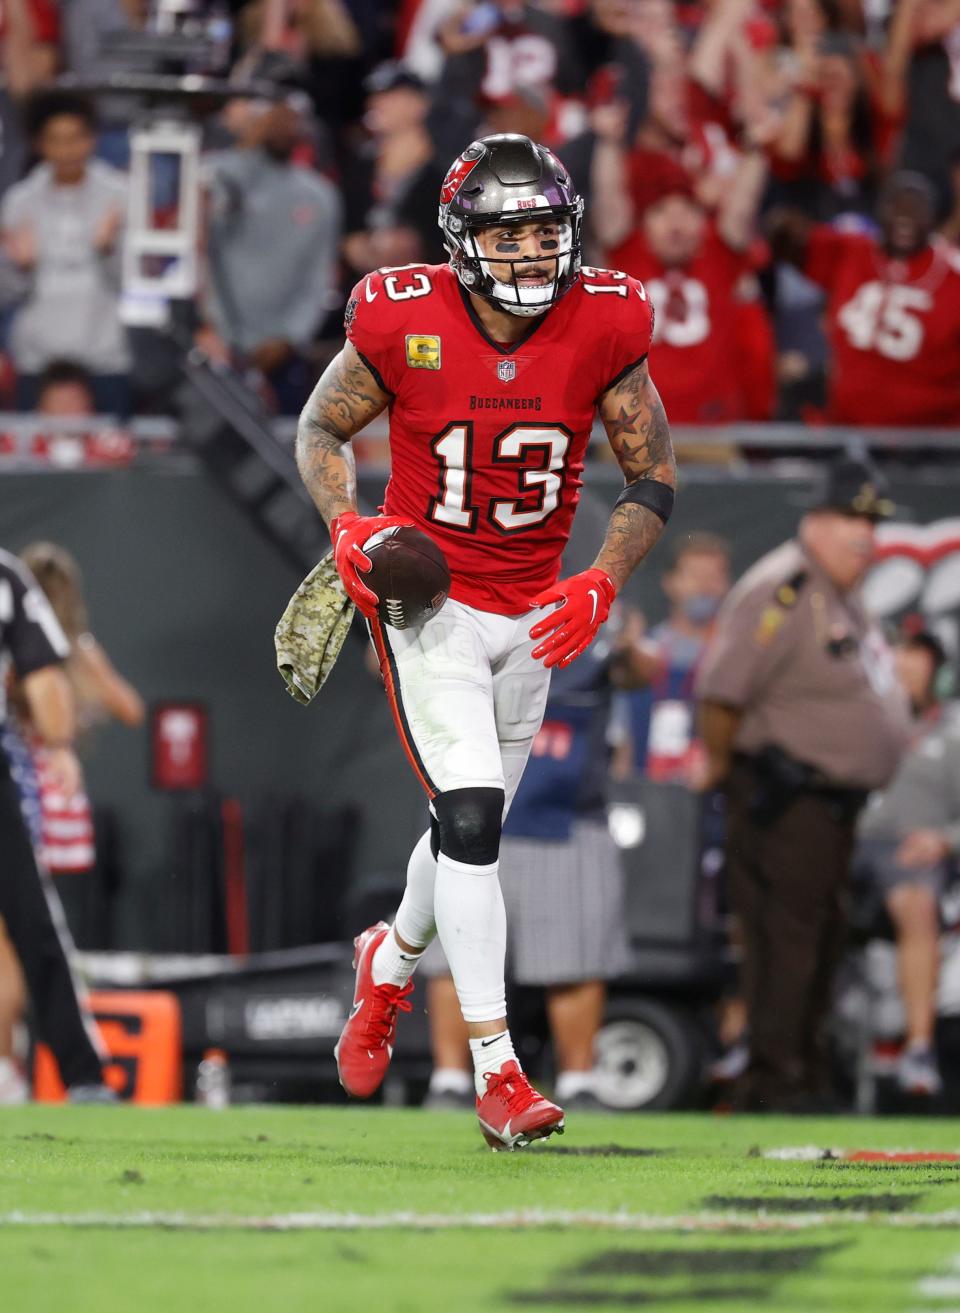 Mike Evans and the Tampa Bay Buccaneers are favored to win their NFL Week 12 game against the Indianapolis Colts.